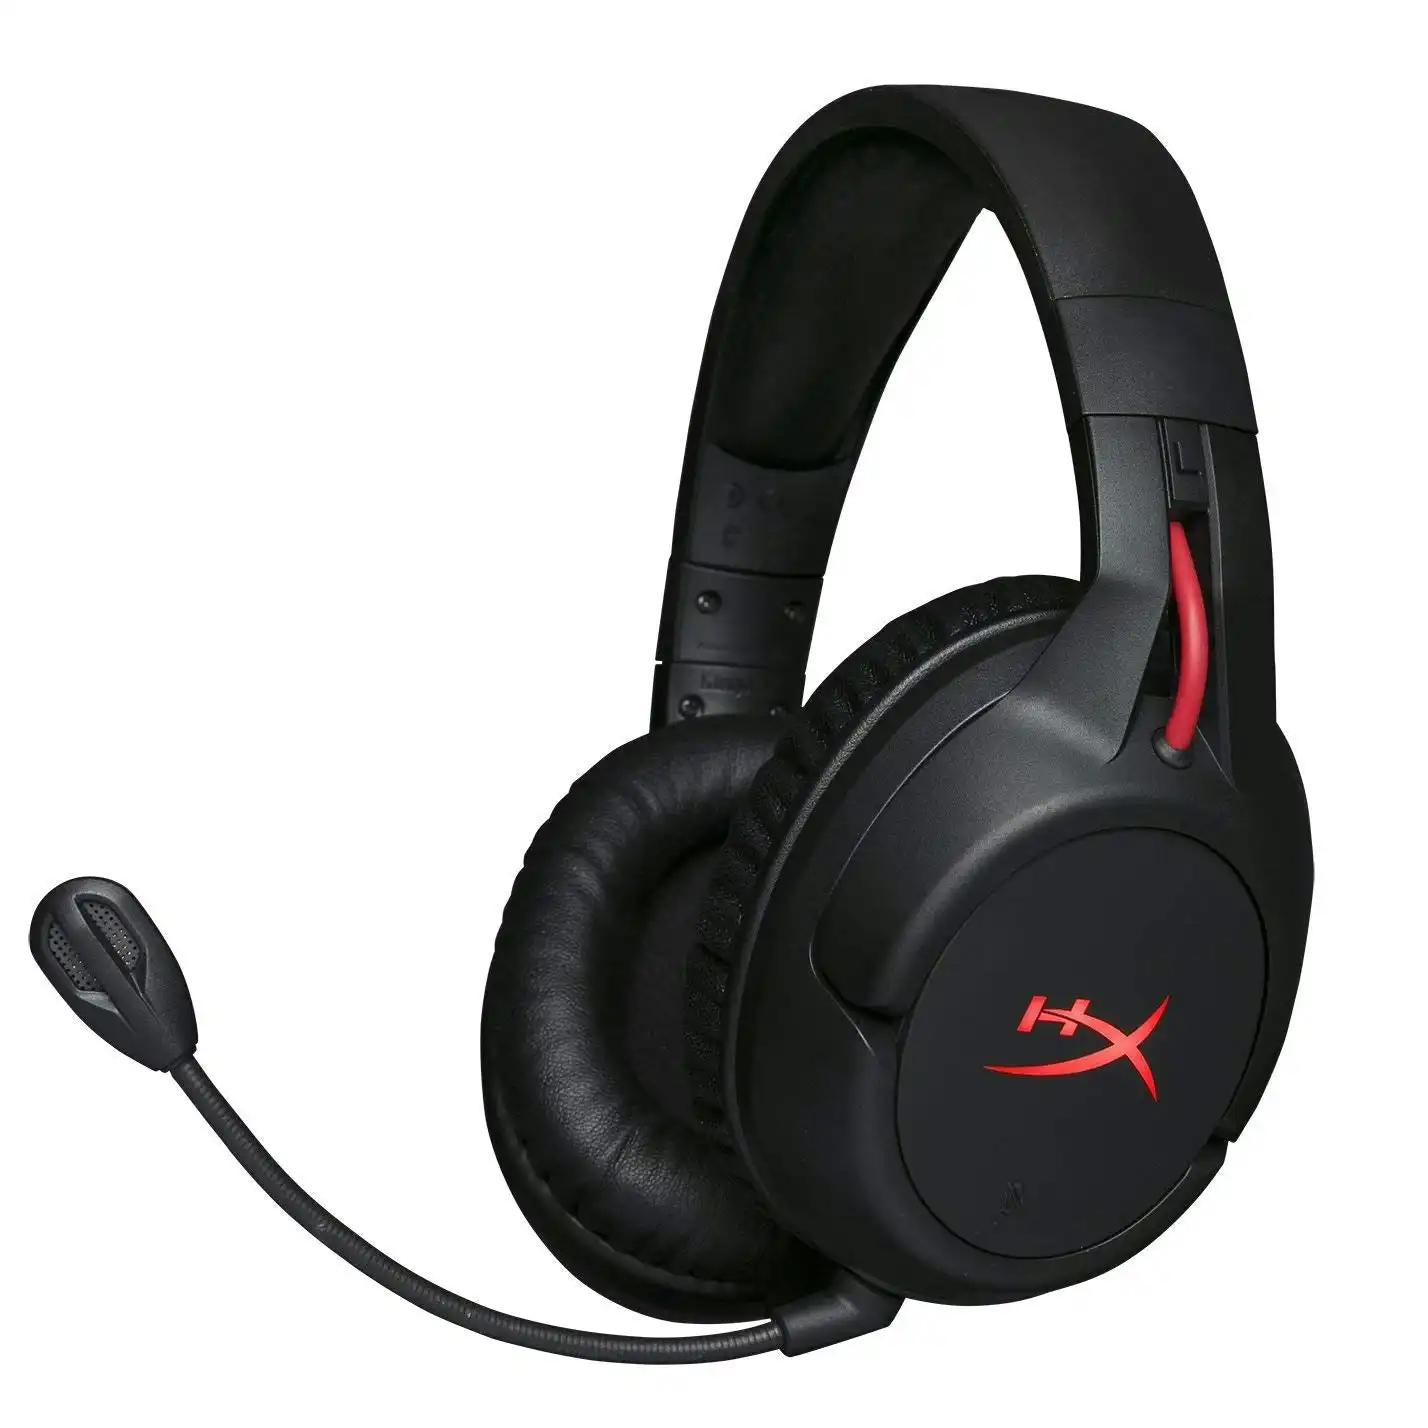 HyperX Cloud Flight - Wireless Gaming Headset, with Long Lasting Battery Up to 30 hours of Use, Detachable Noise Cancelling Microphone